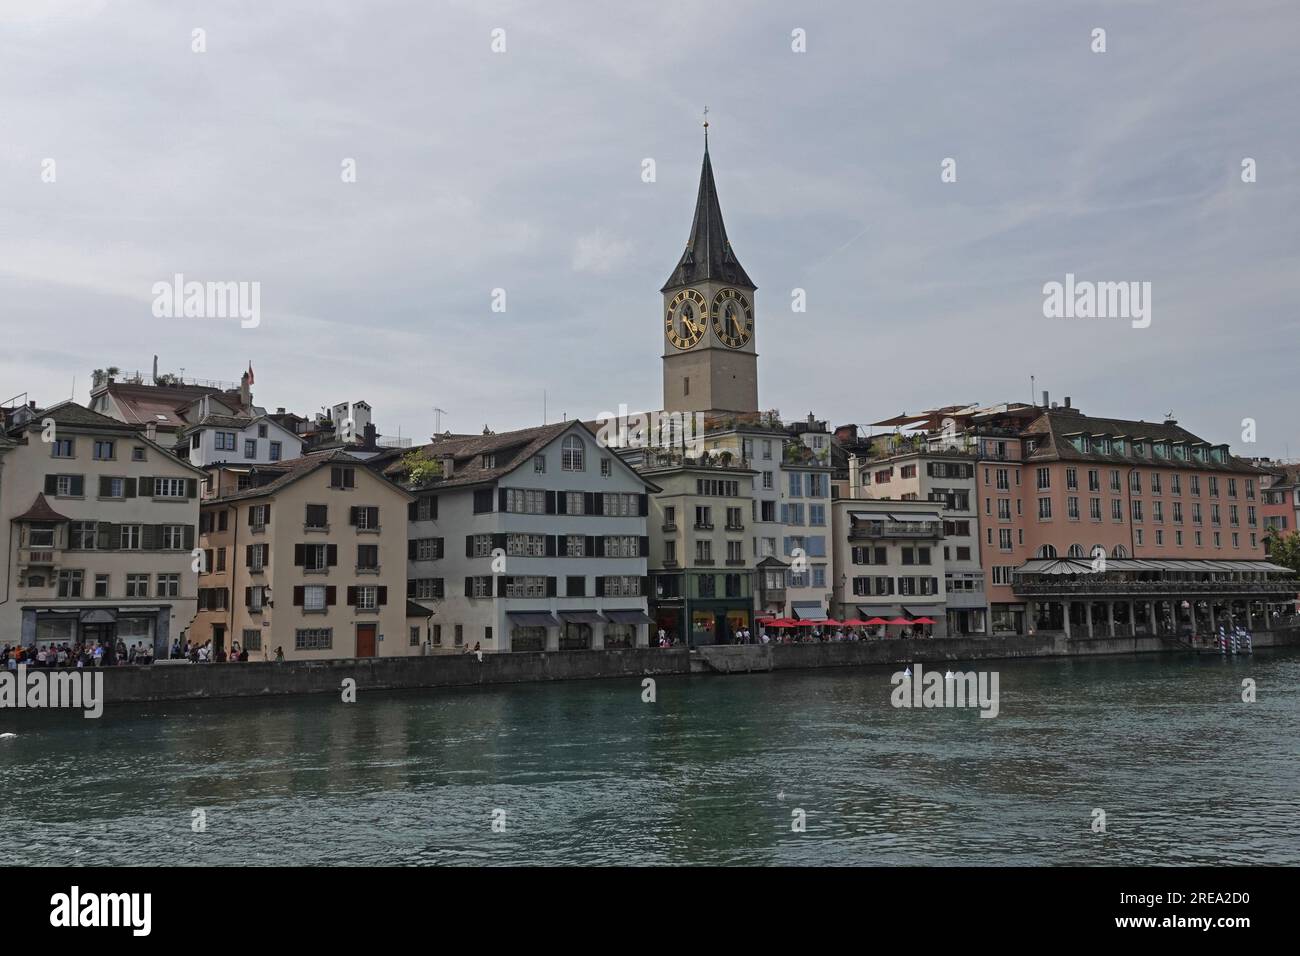 Old Town Zurich, Switzerland is shown during the day, with the Limmat River in the foreground. Stock Photo